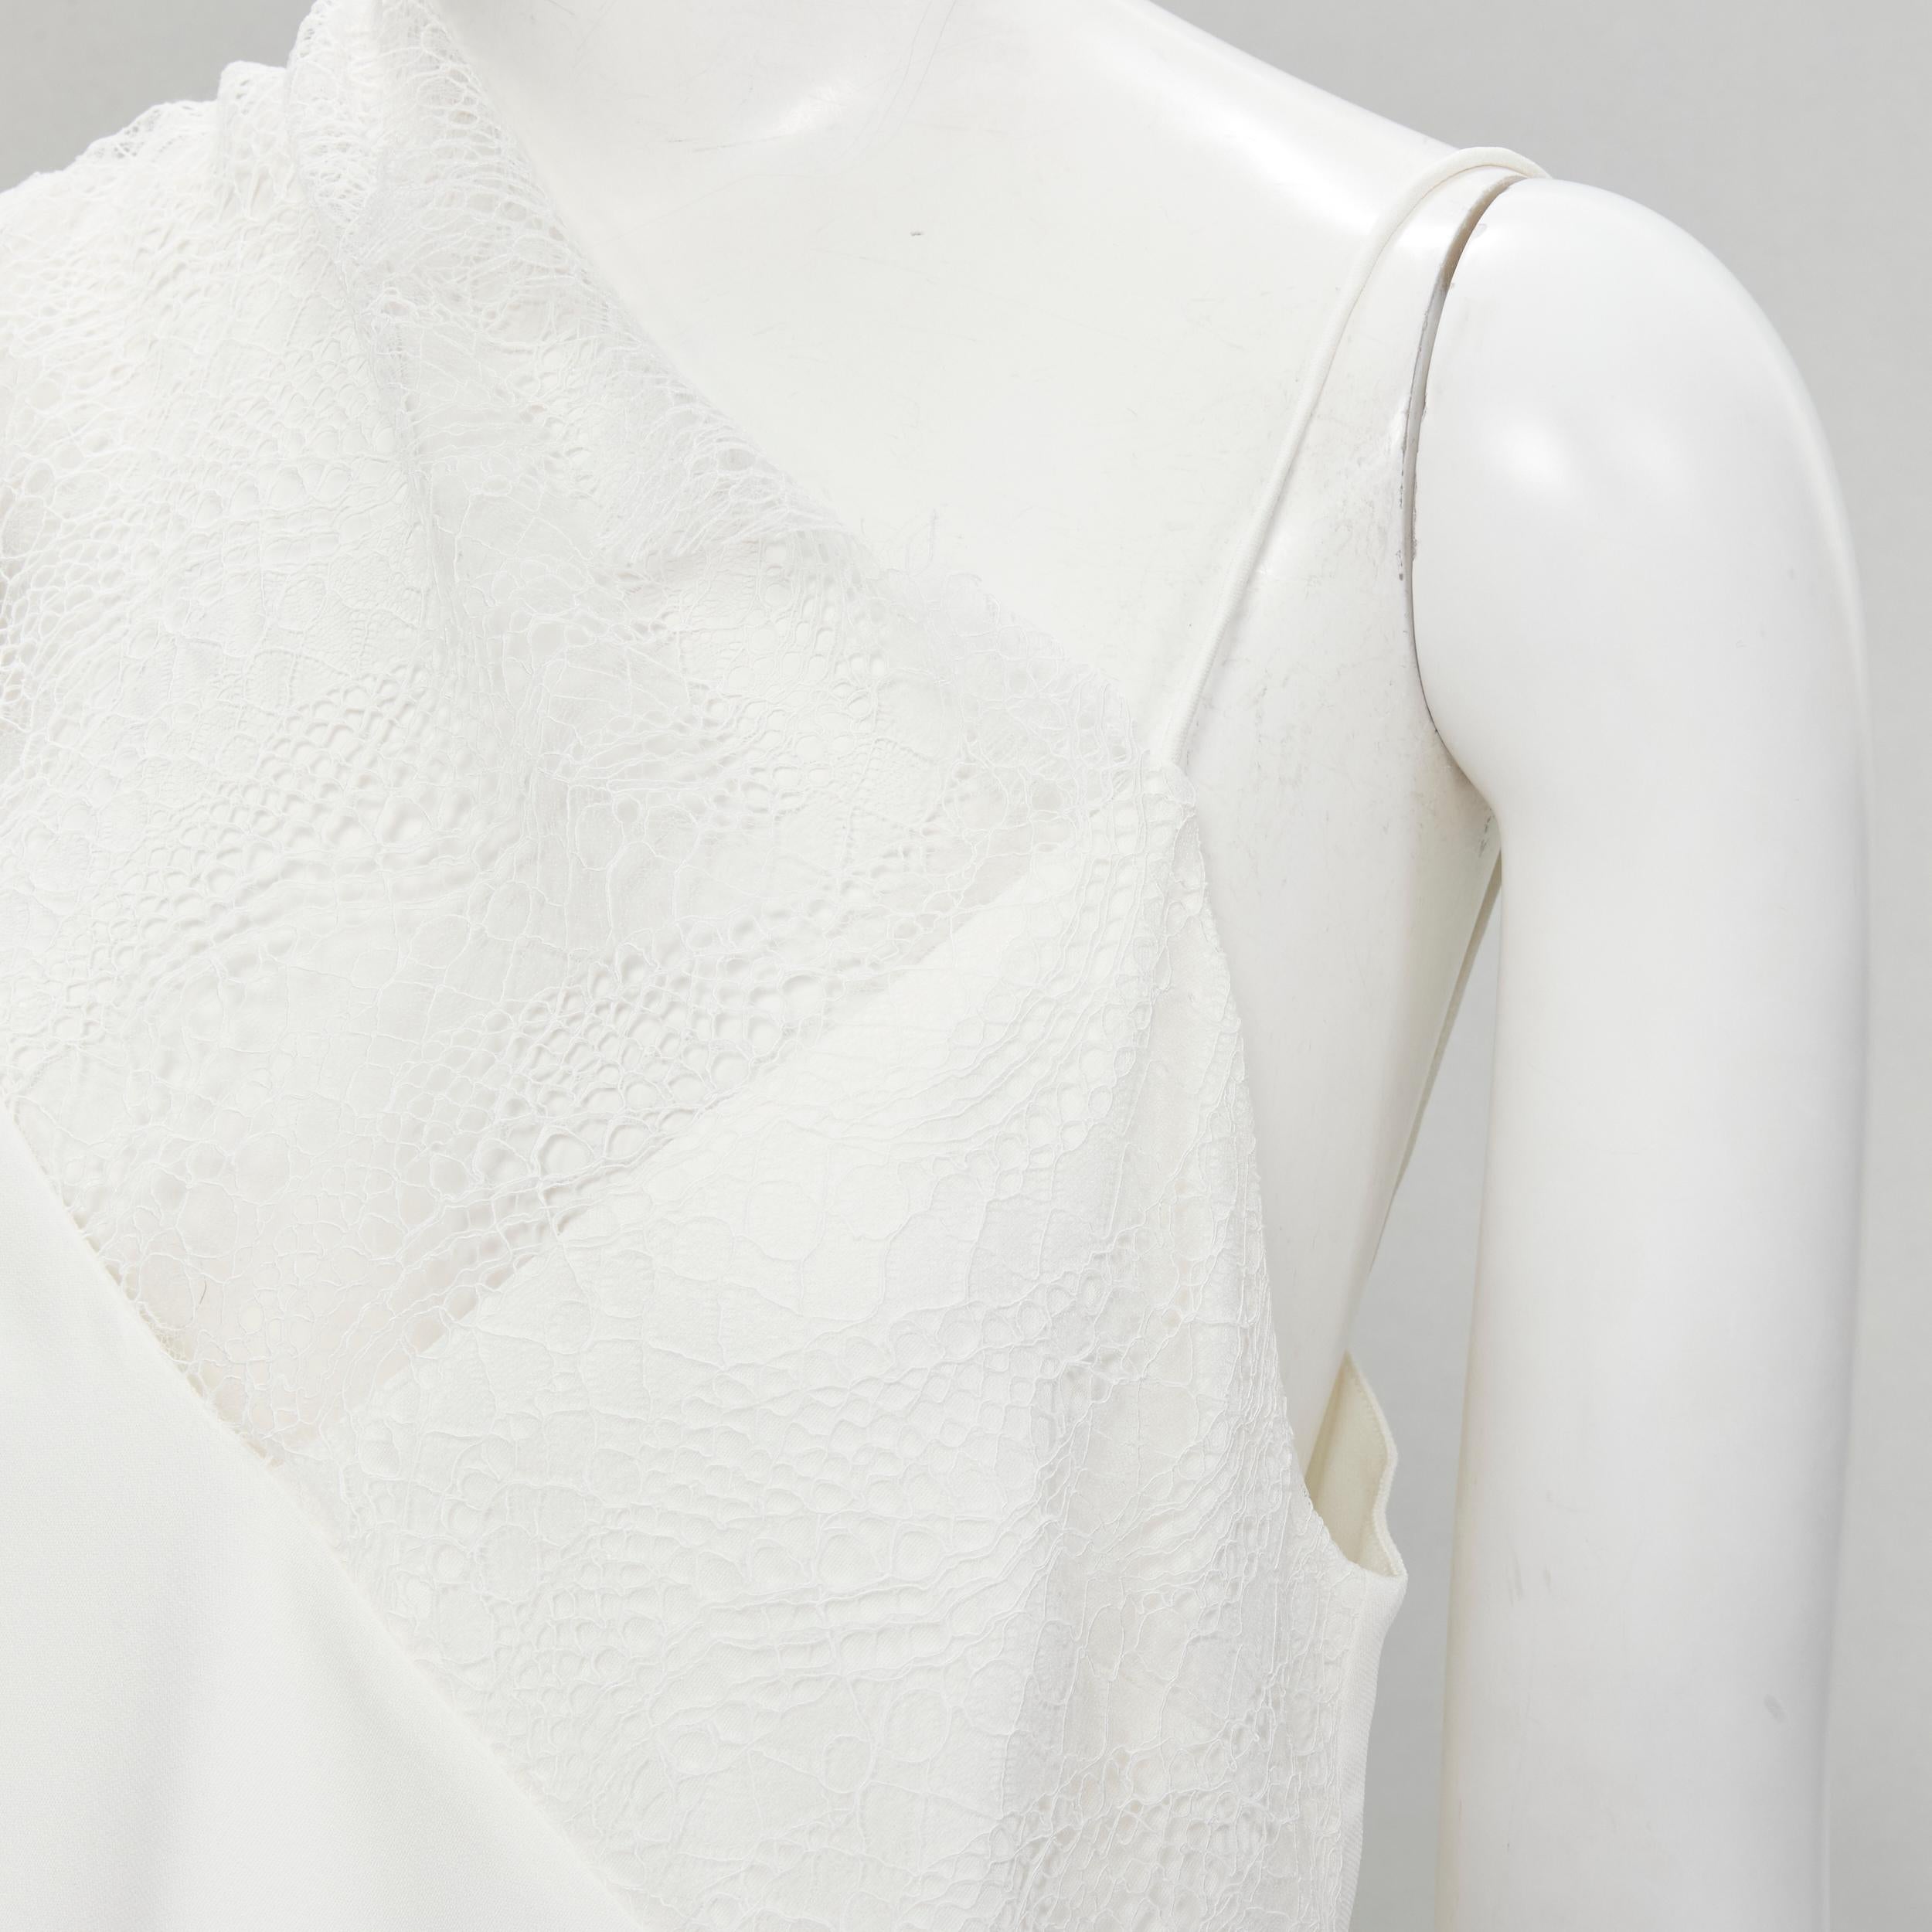 CHRISTOPHER ESBER white asymmetric lace trim camisole slip top UK10 M
Brand: Christopher Esber
Extra Detail: Designed to look like a regular spaghetti cami with asymmetric lace trim

CONDITION:
Condition: Excellent, this item was pre-owned and is in